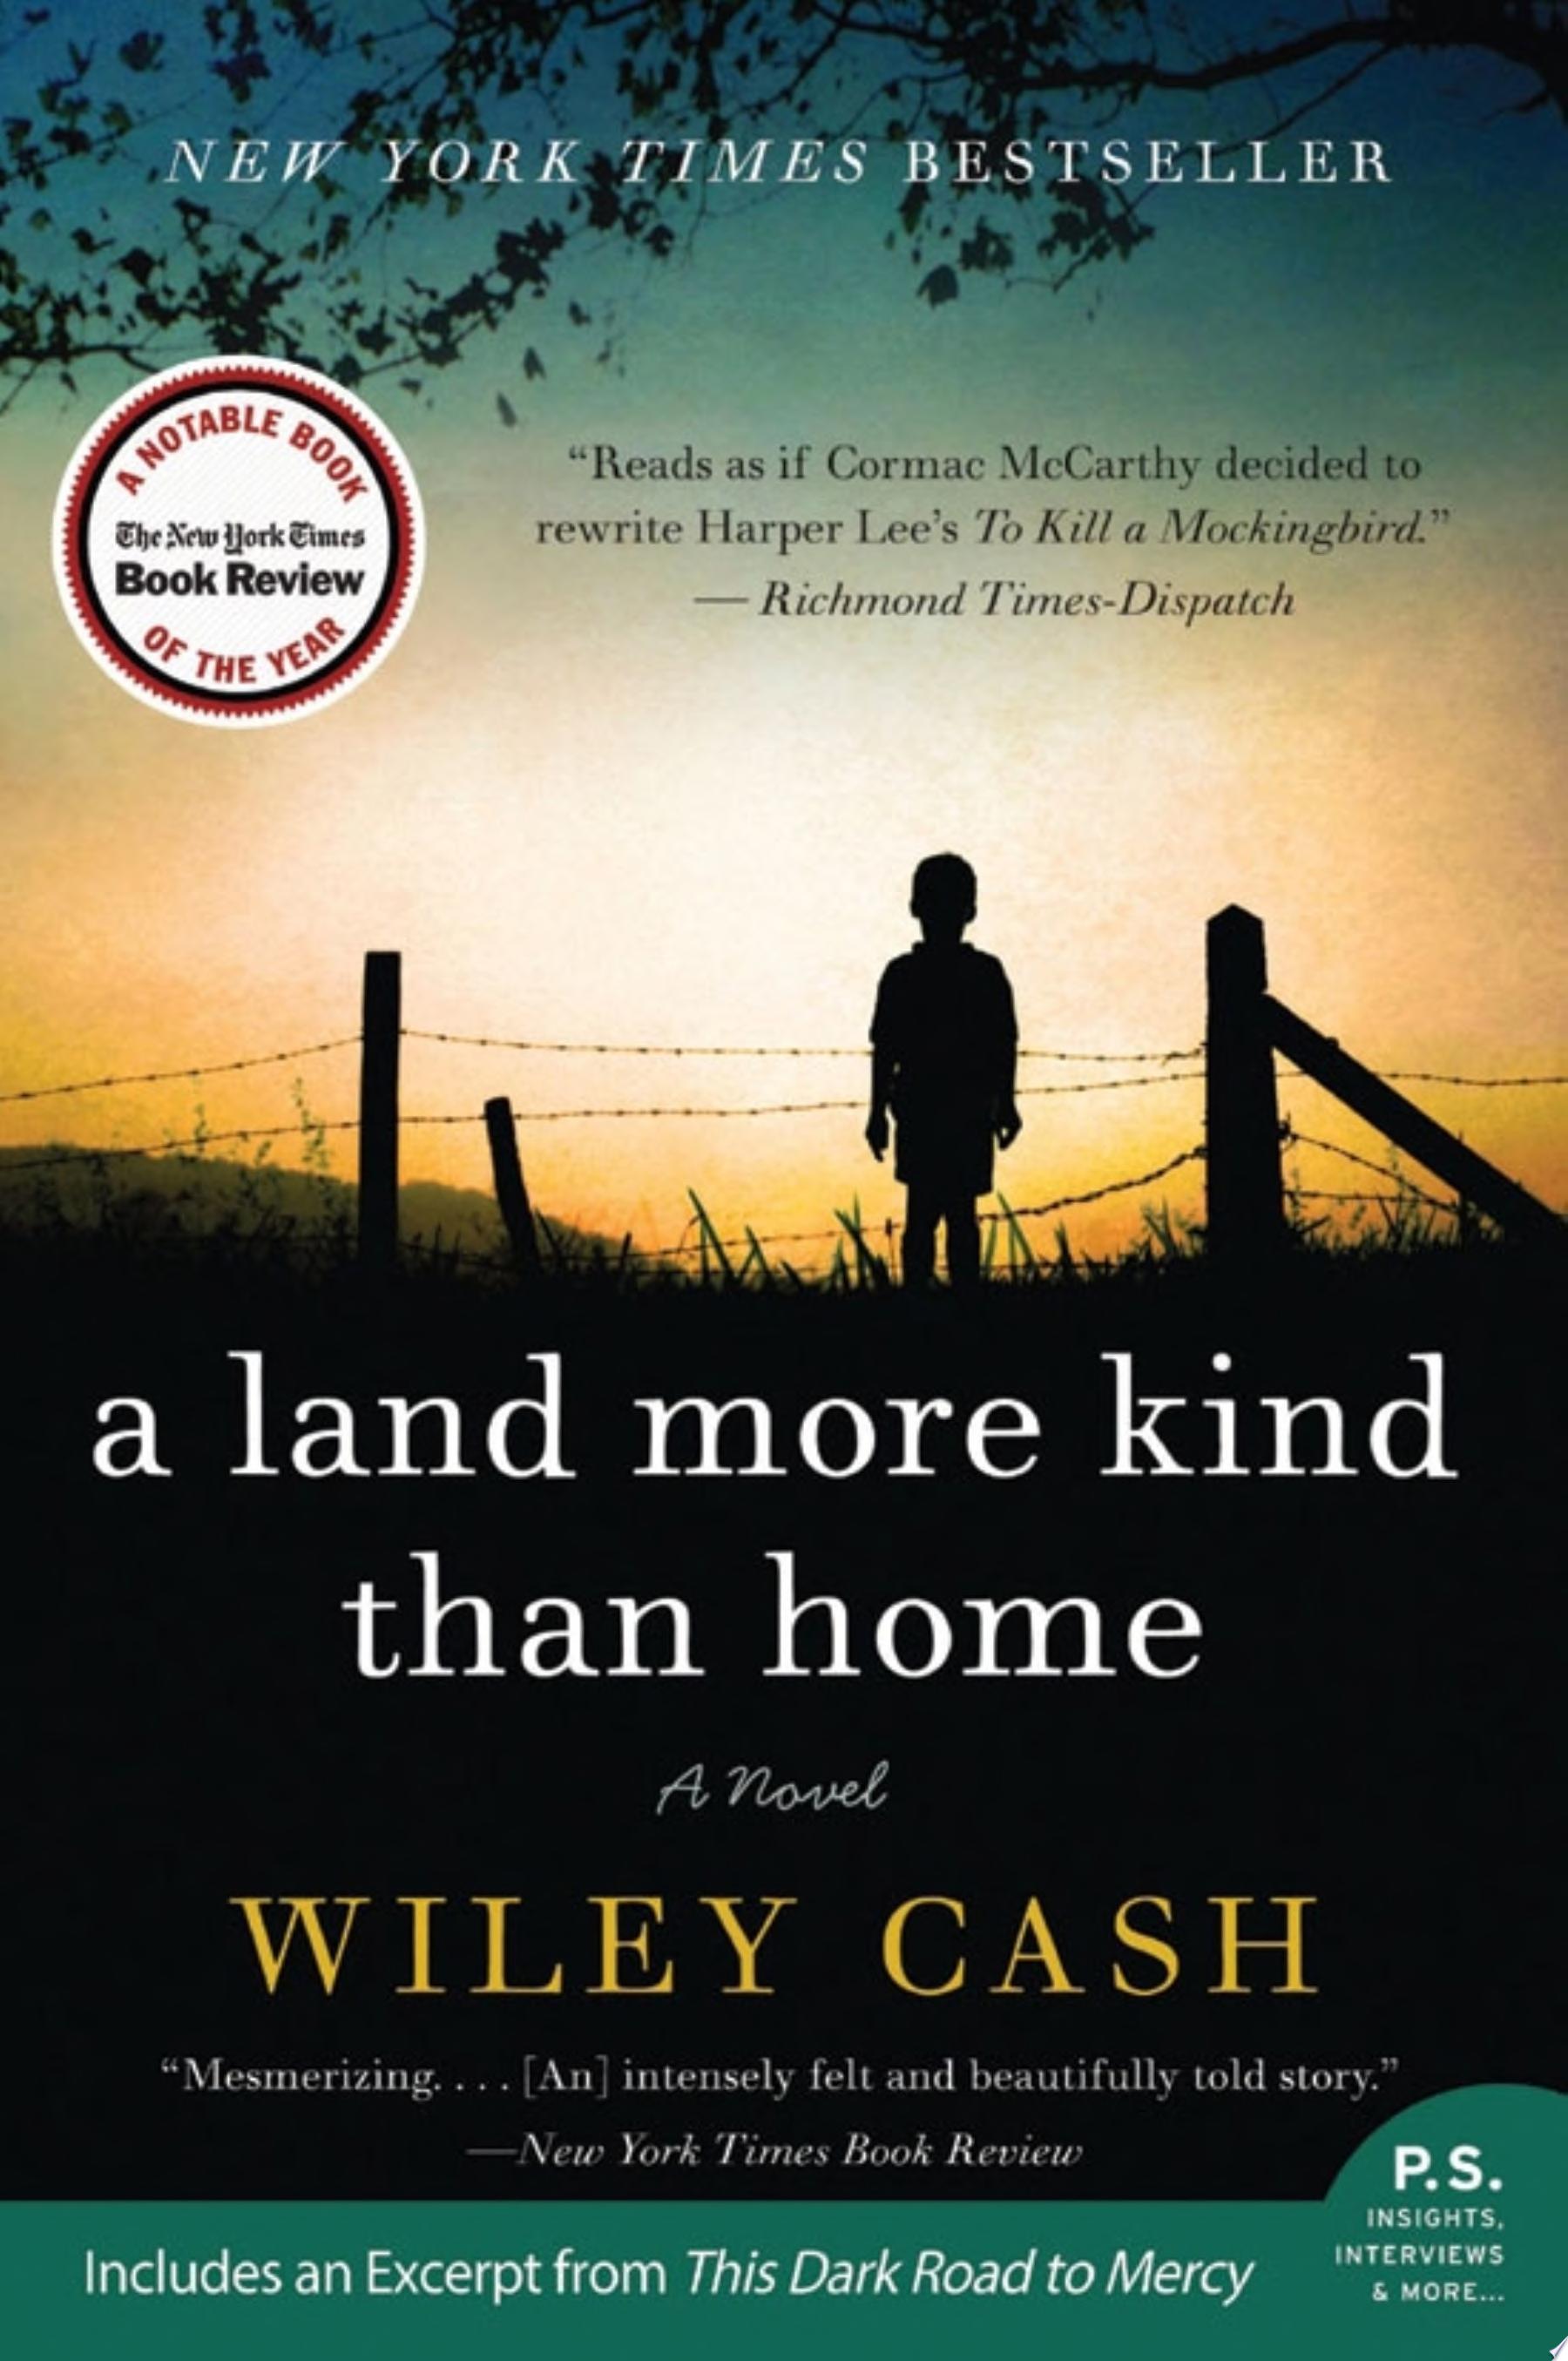 Image for "A Land More Kind Than Home"